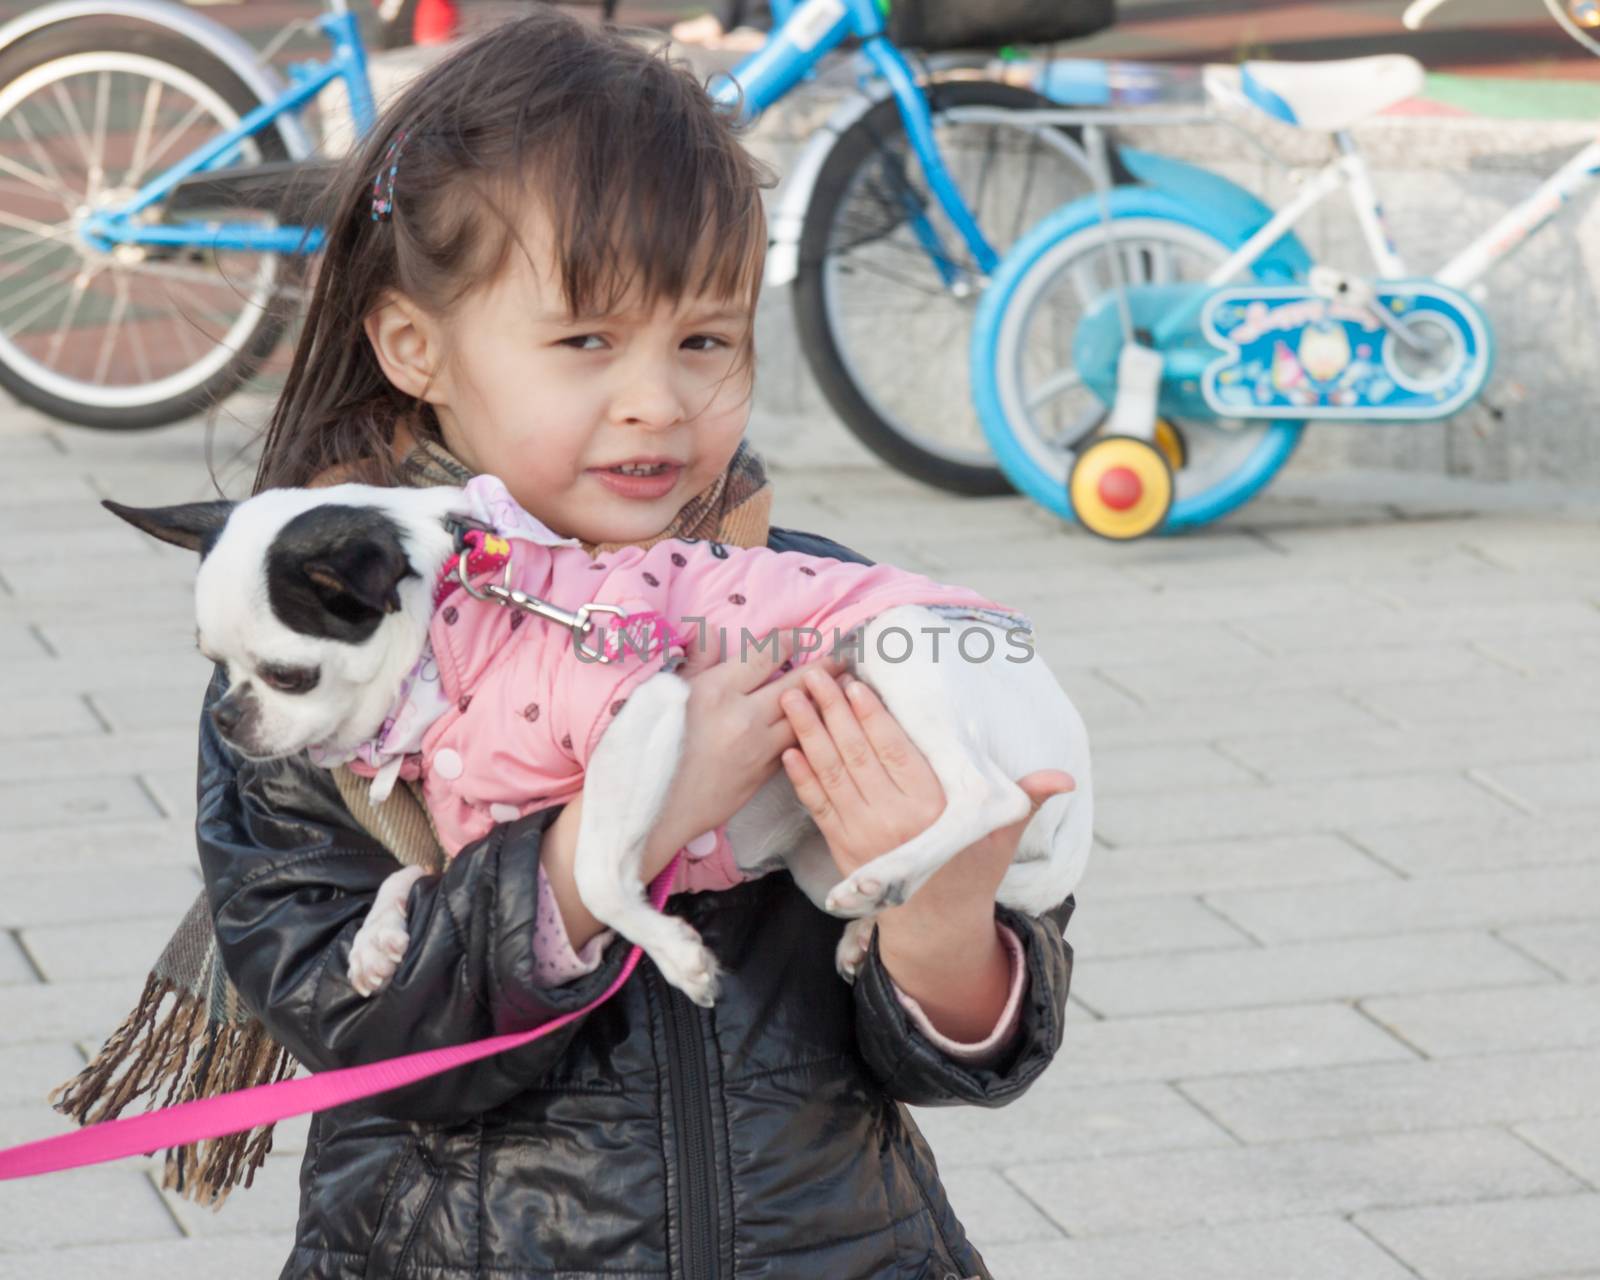 Young girl carrying dog by imagesbykenny